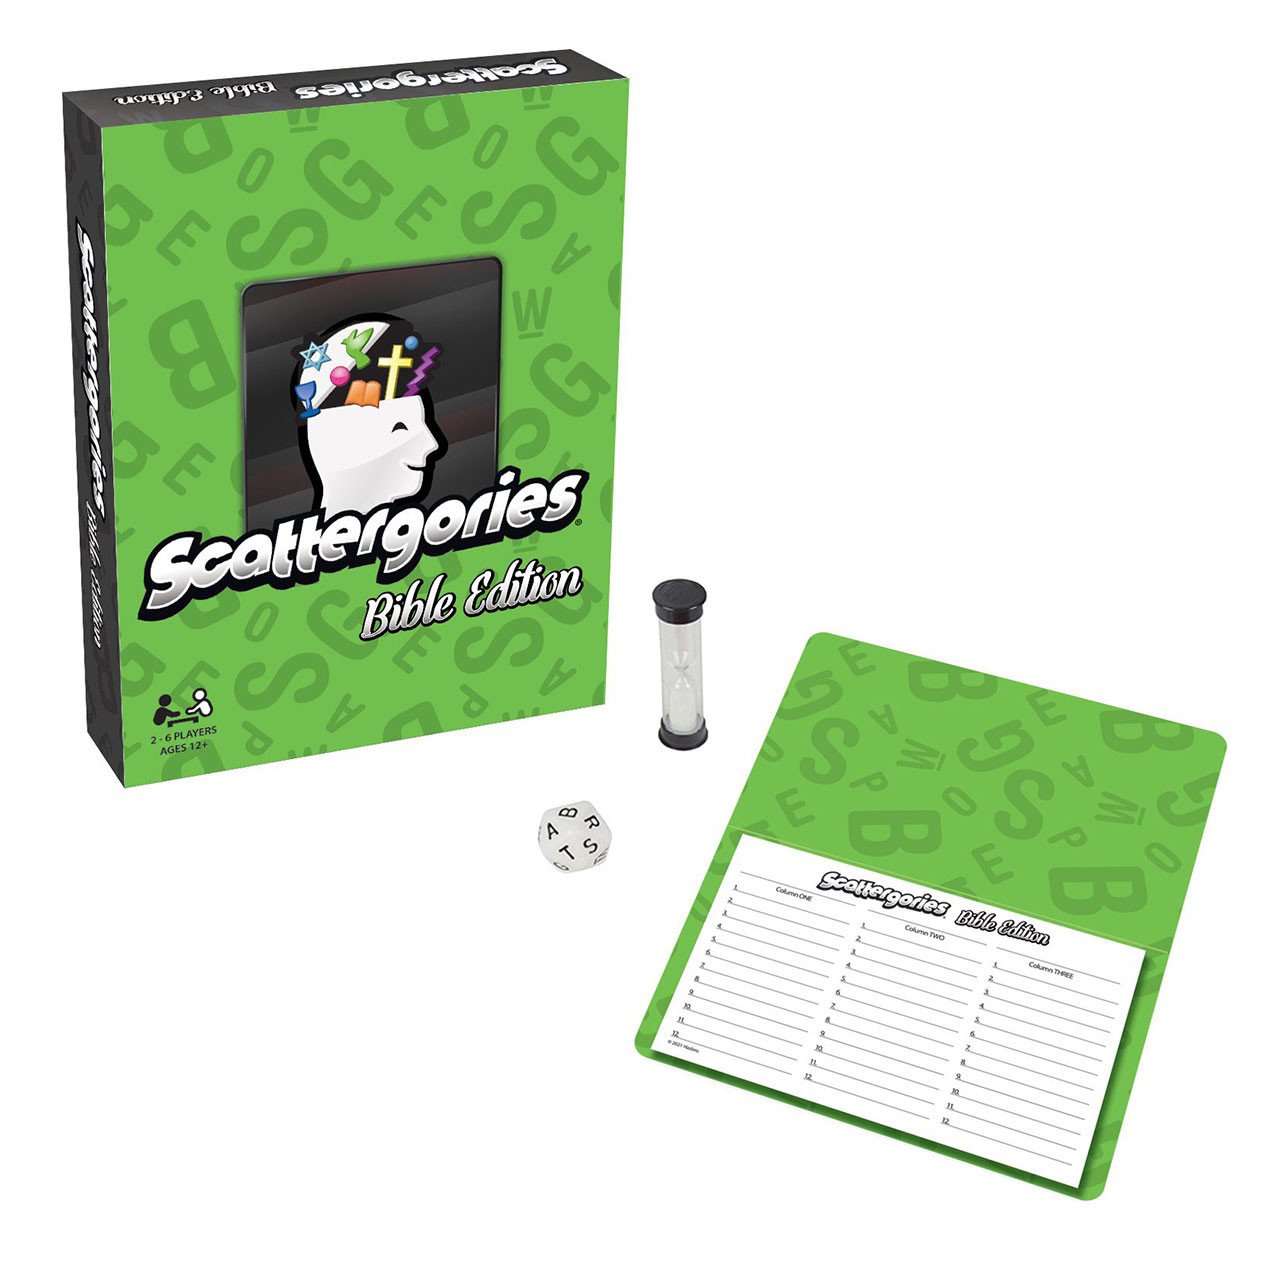 Scattergories Bible Edition with game parts showing